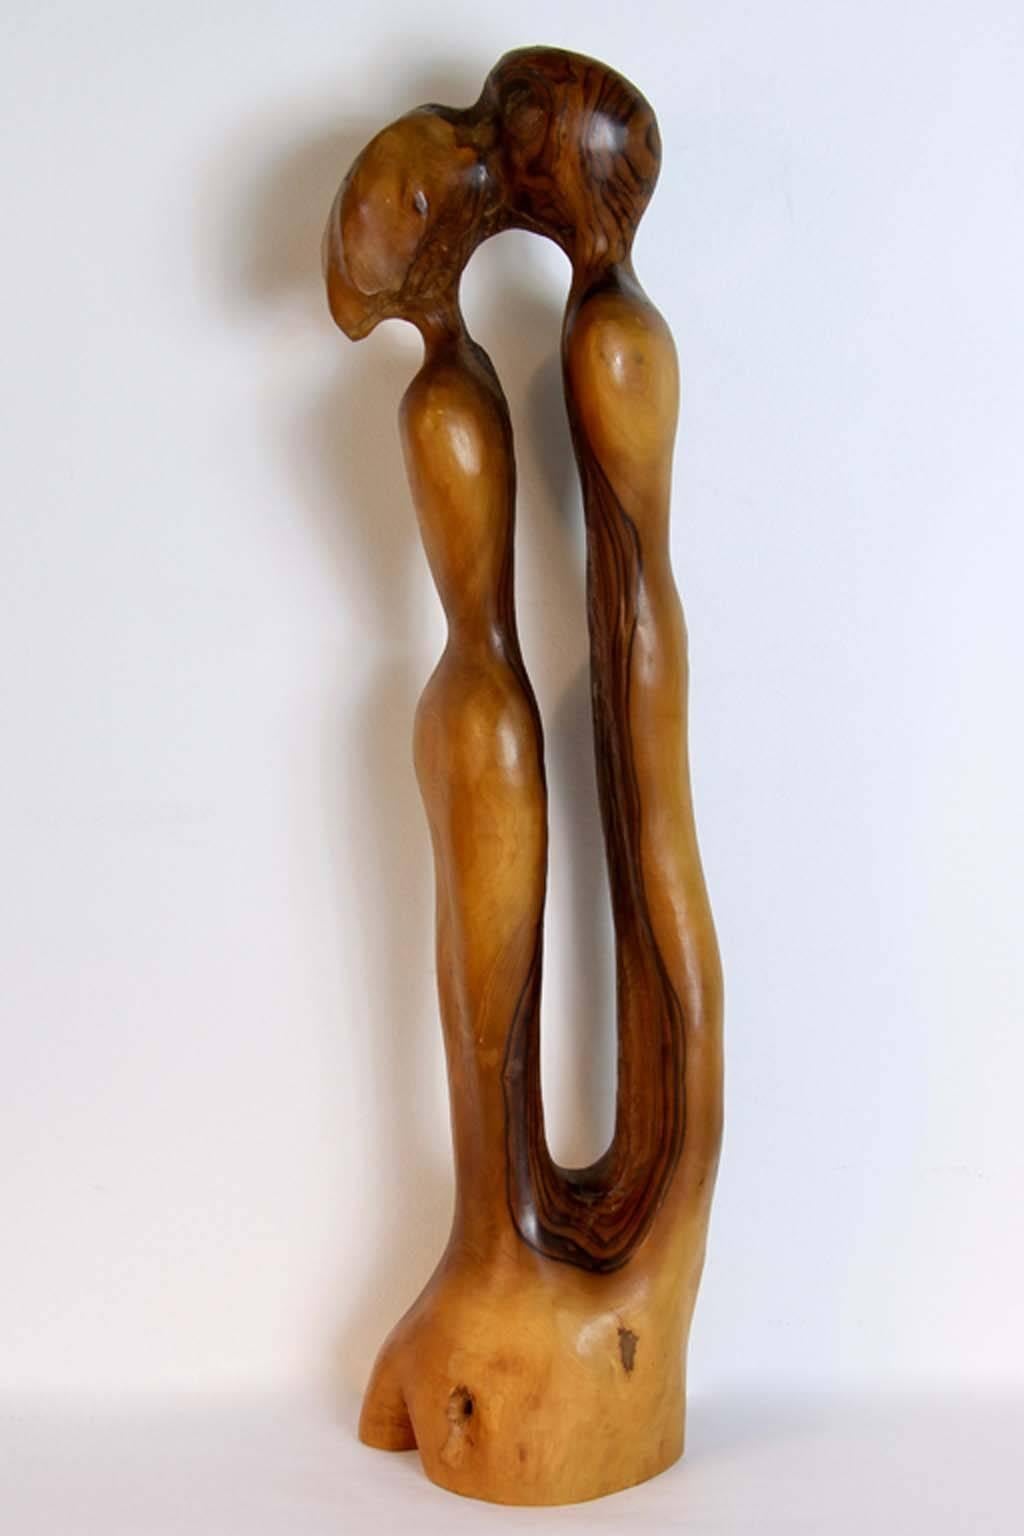 Leon Bronstein Olive Wood Sculpture In Excellent Condition For Sale In Bridport, CT